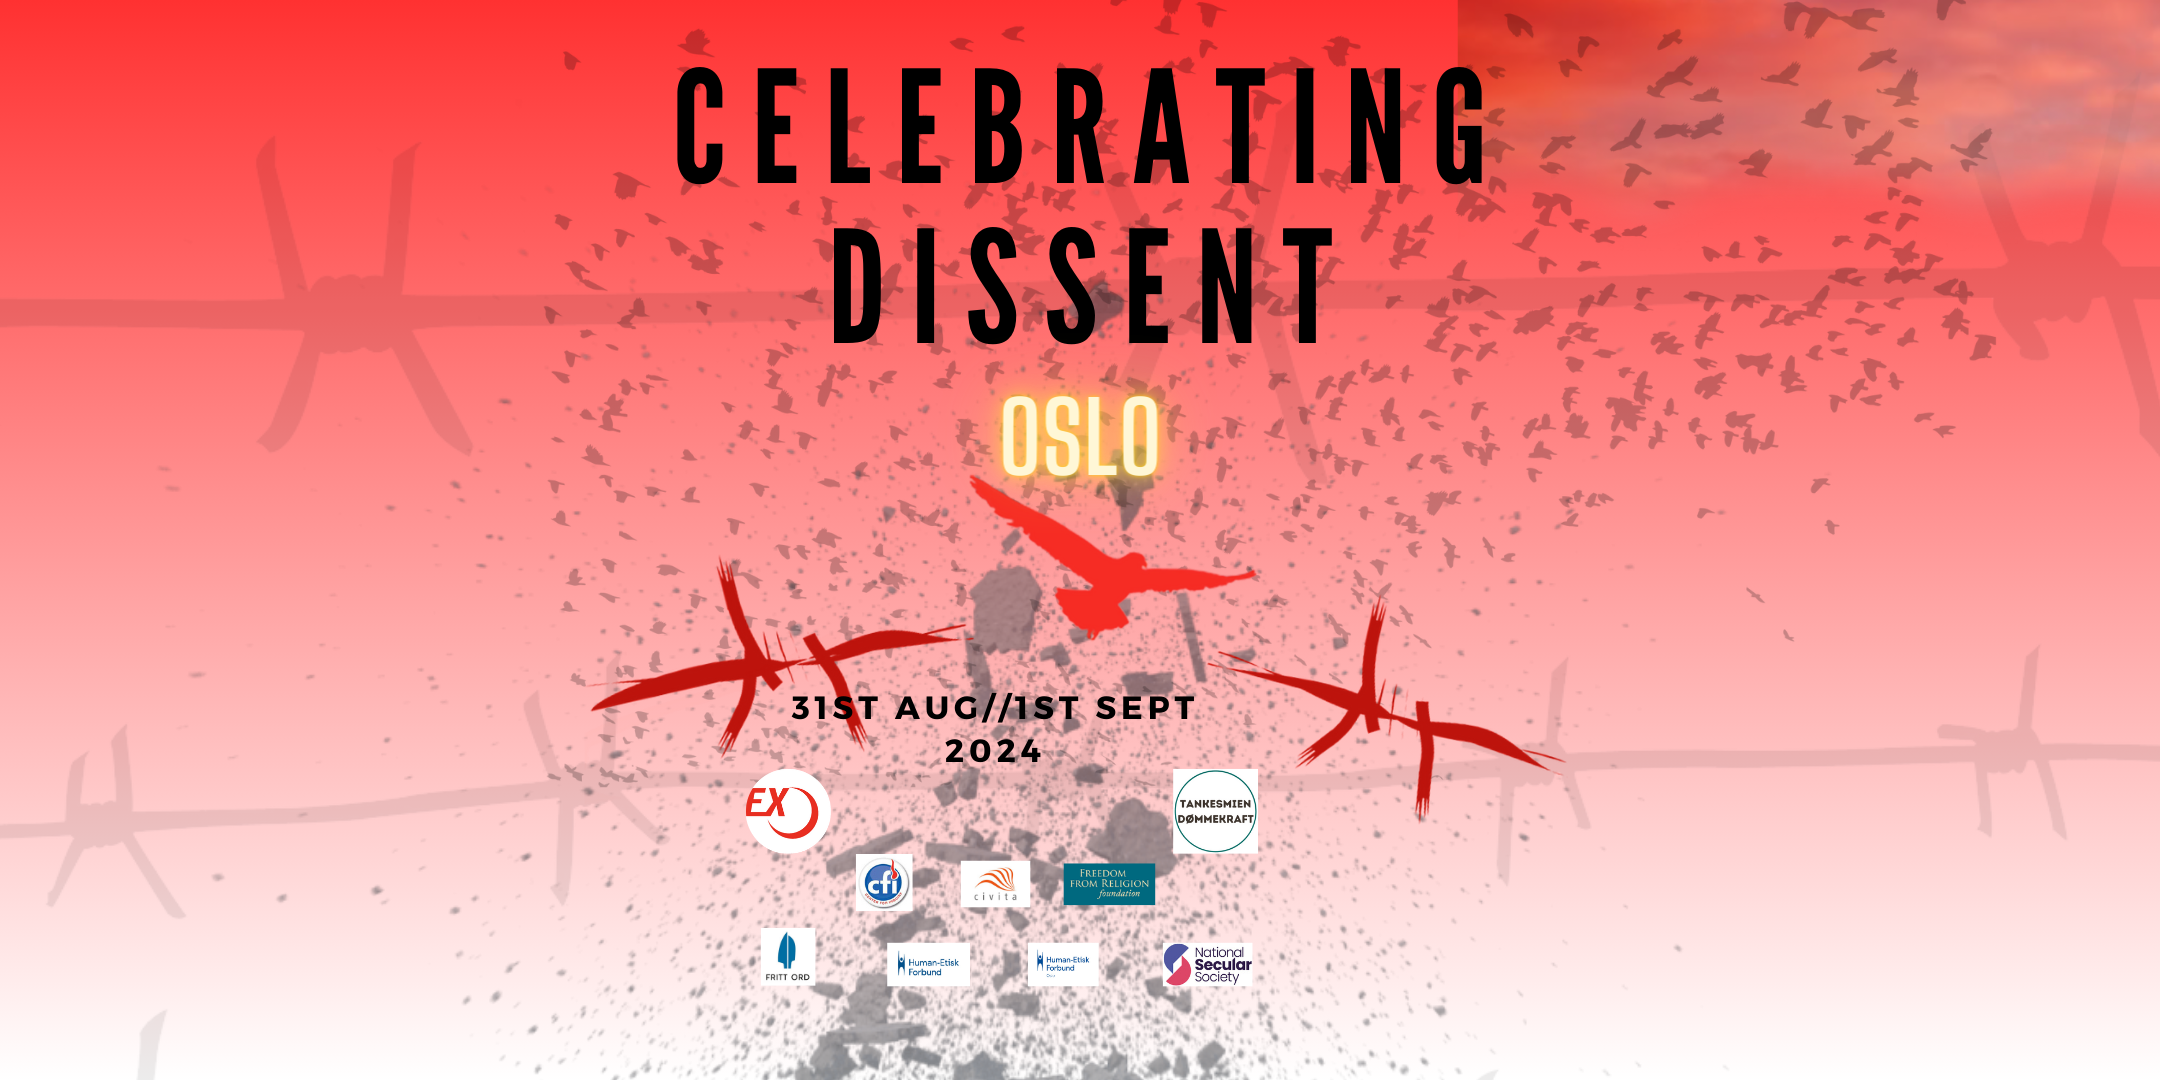 banner for Celebrating Dissent, an event in Oslo, Norway on August 31 to September 1, 2024